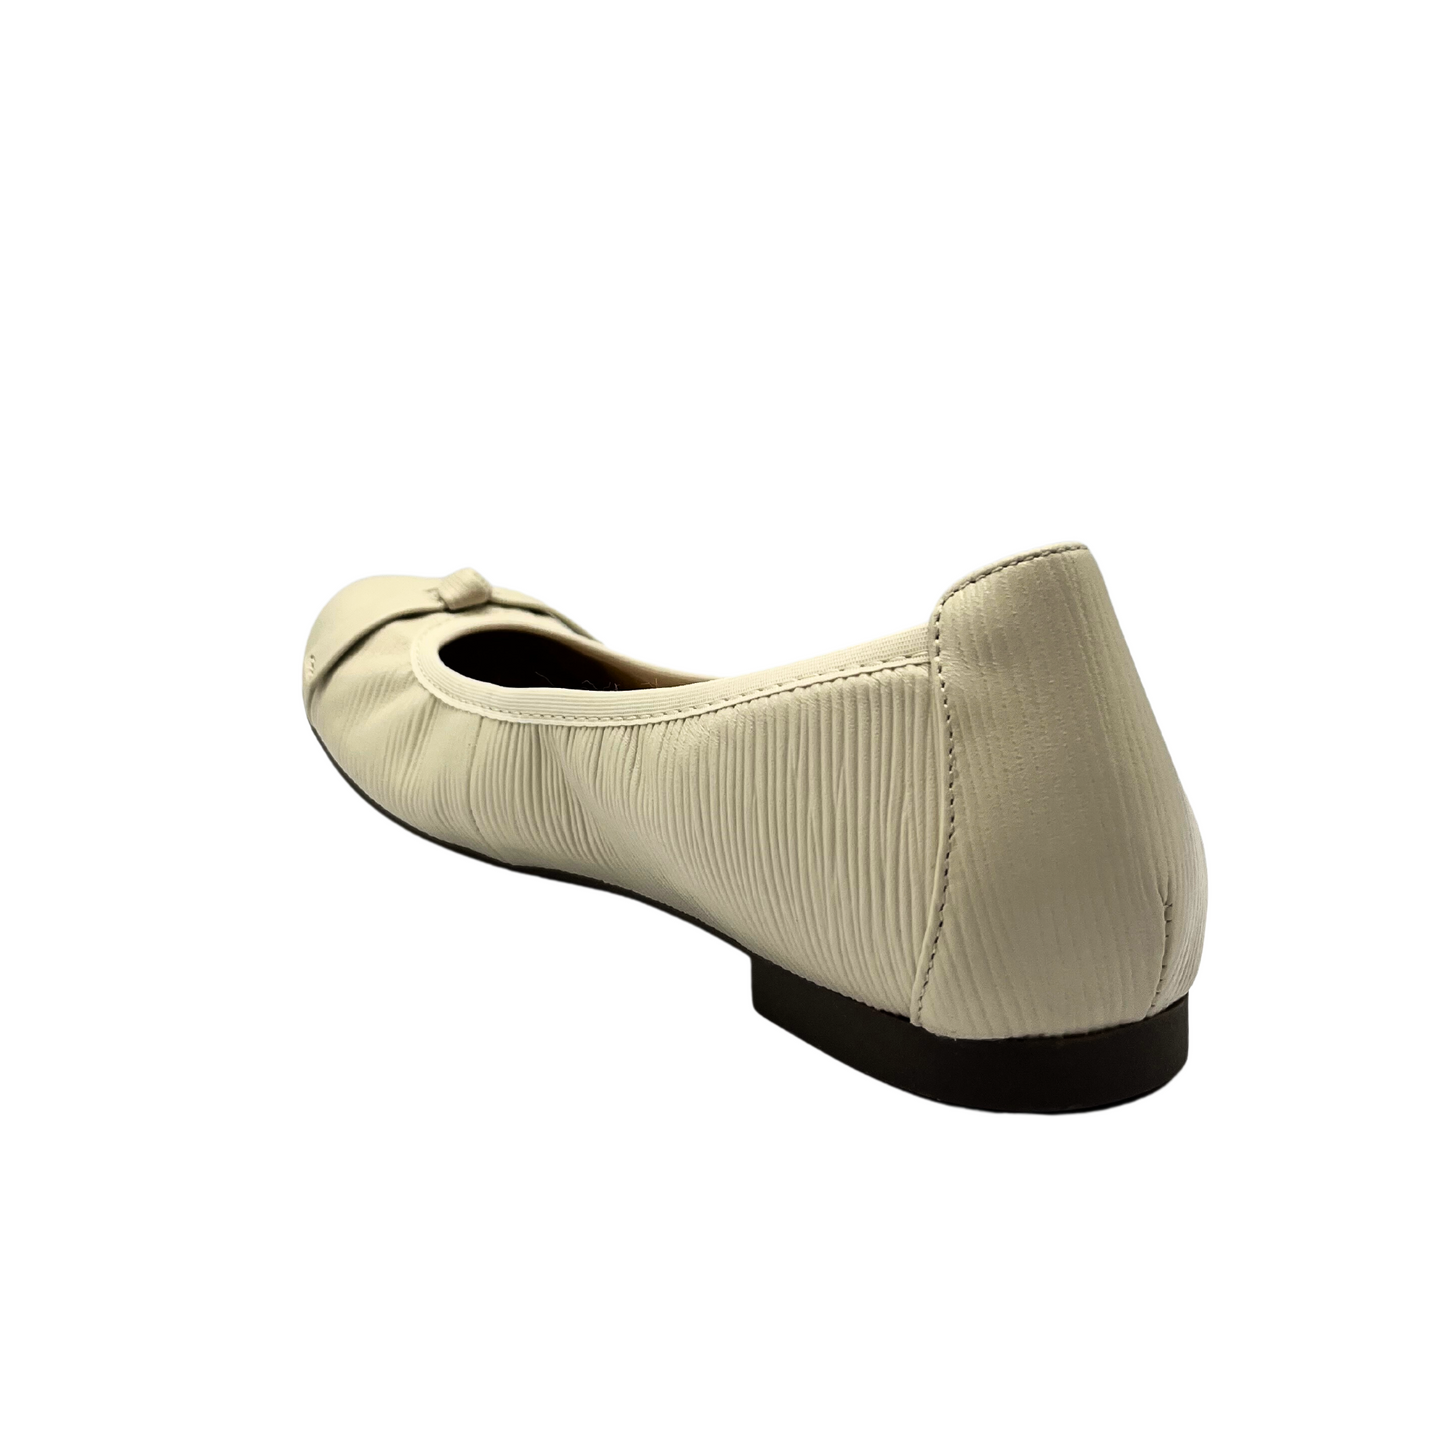 Angled rear view of teh Vionic Amorie ballet flat in a textured cream leather